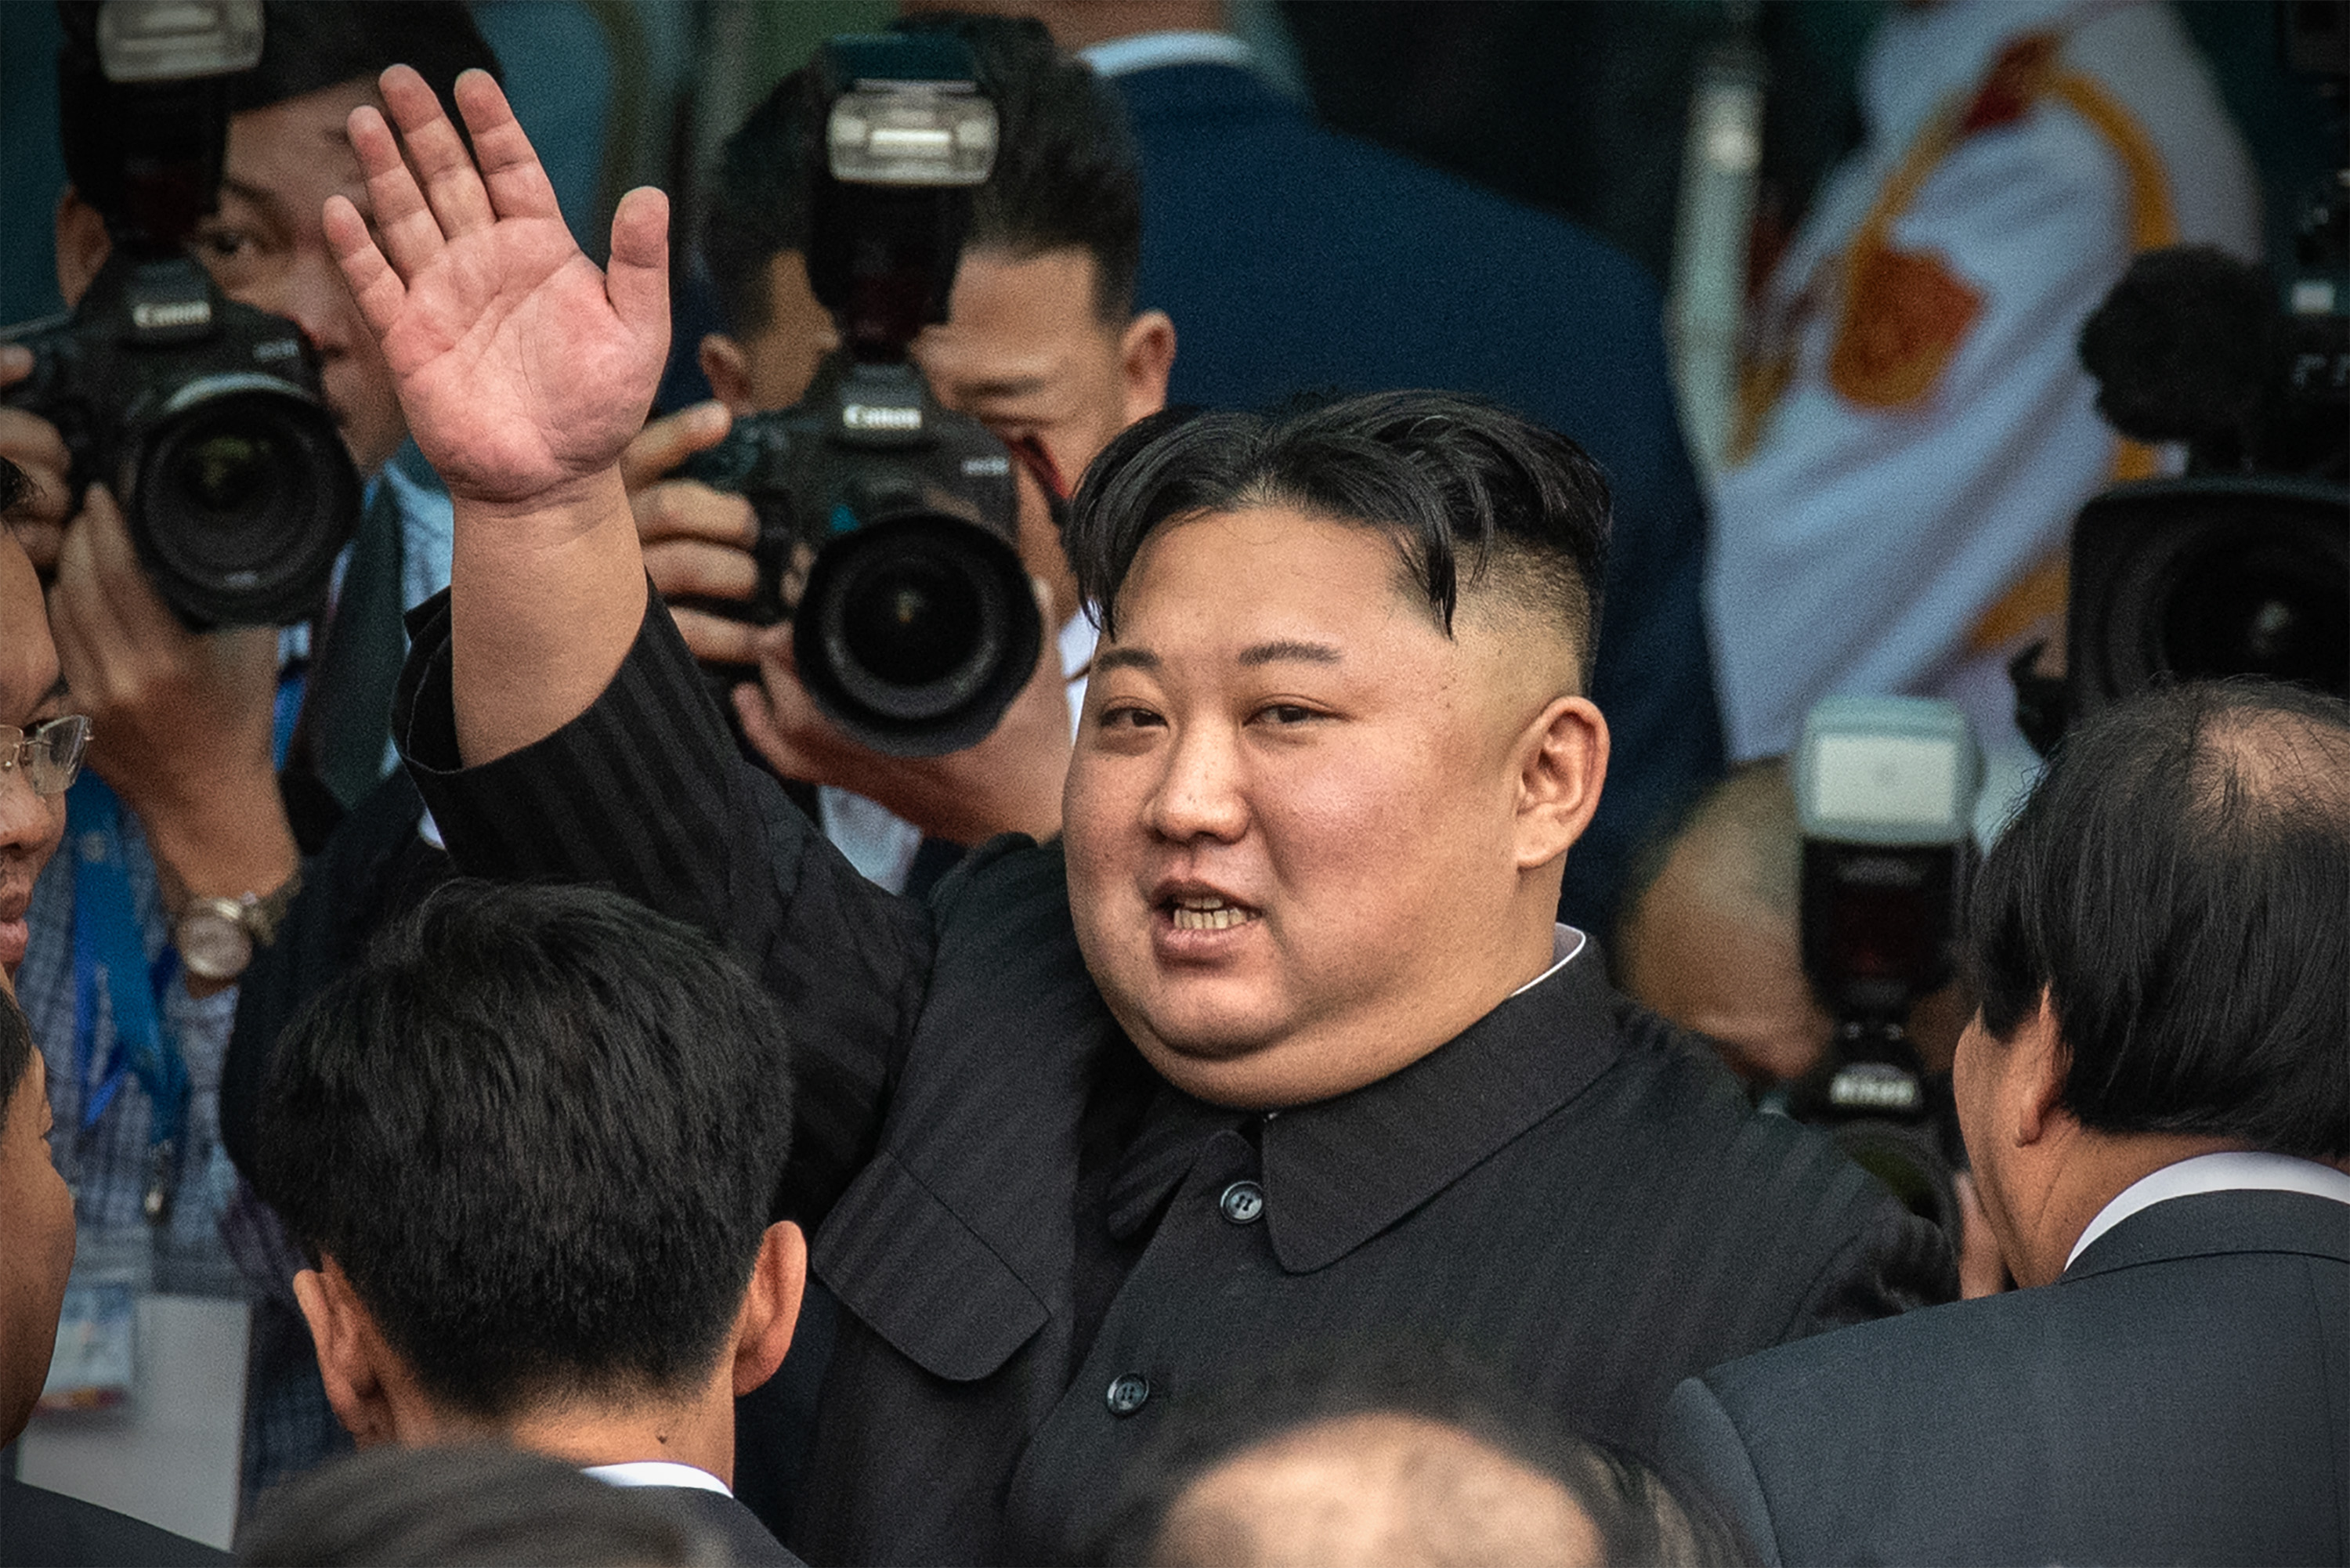 DONG DANG, VIETNAM - MARCH 02: North Korean leader Kim Jong-un waves as he prepares to leave Vietnam by train after a two day official visit preceded by the DPRK-USA Hanoi summit, on March 2, 2019 in Dong Dang, Vietnam. North Korean leader Kim Jong-un met with Vietnamese President Nguyen Phu Trong and Prime Minister Nguyen Xuan Phuc during his two-day official visit following a failed summit with U.S. President Donald Trump in Hanoi which ended without agreement. (Photo by Carl Court/Getty Images)